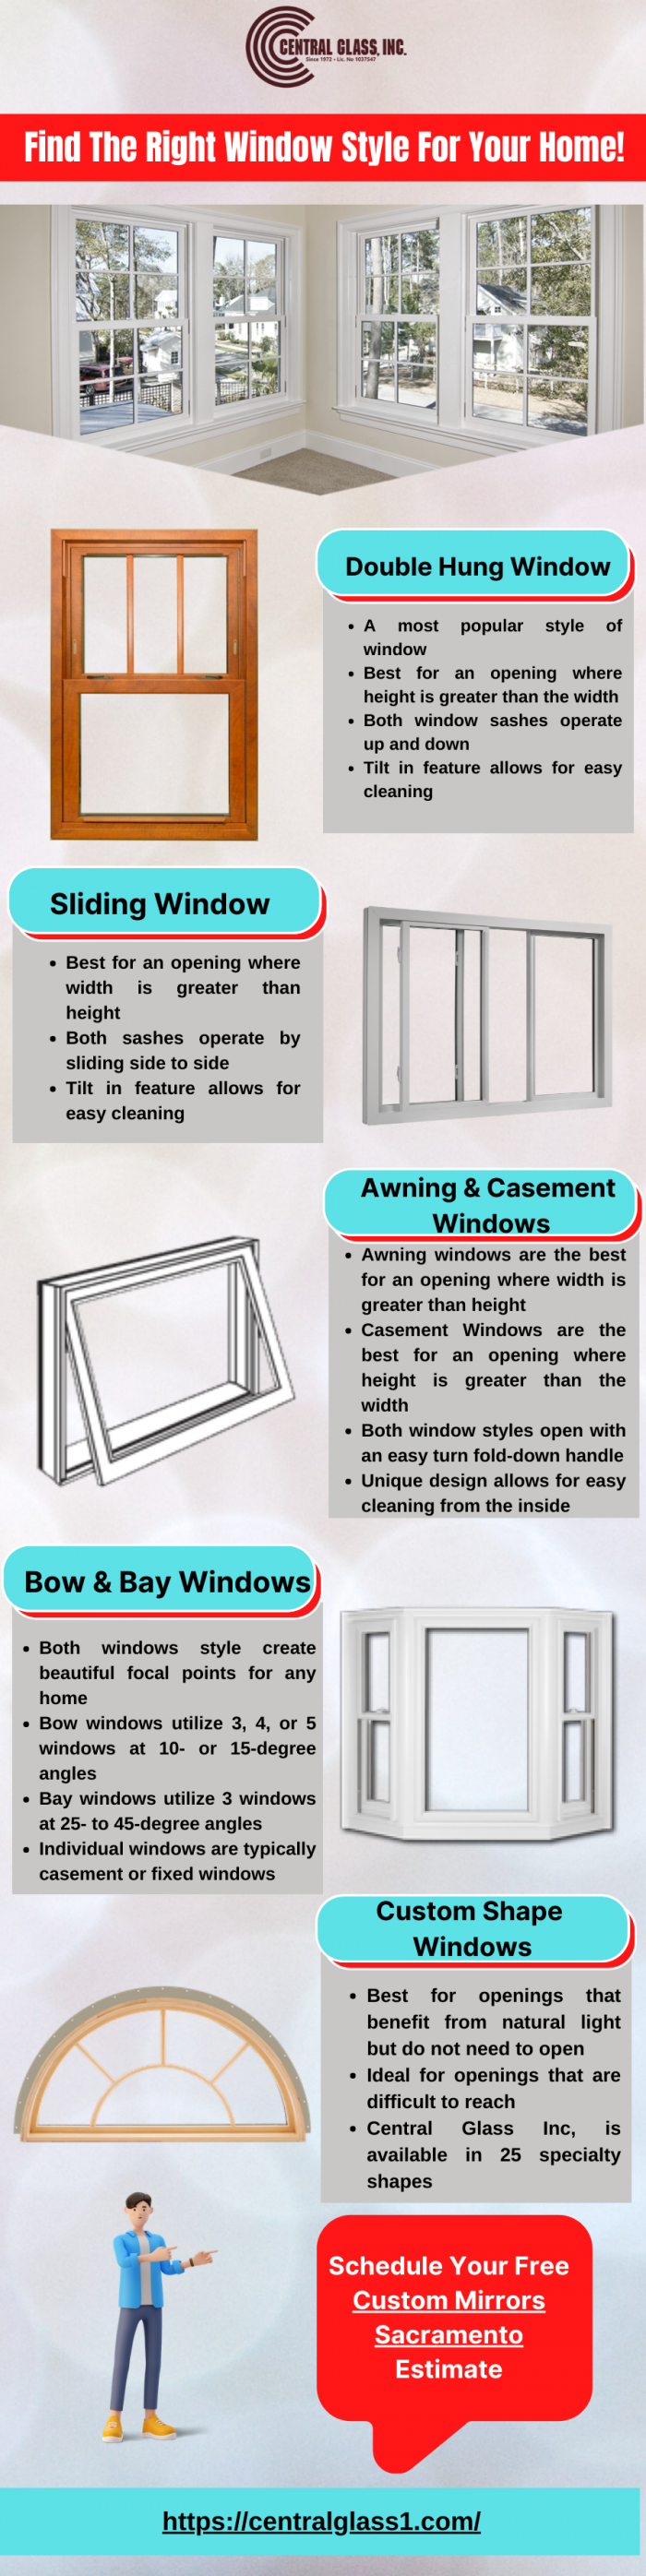 Find The Right Window Style For Your Home!